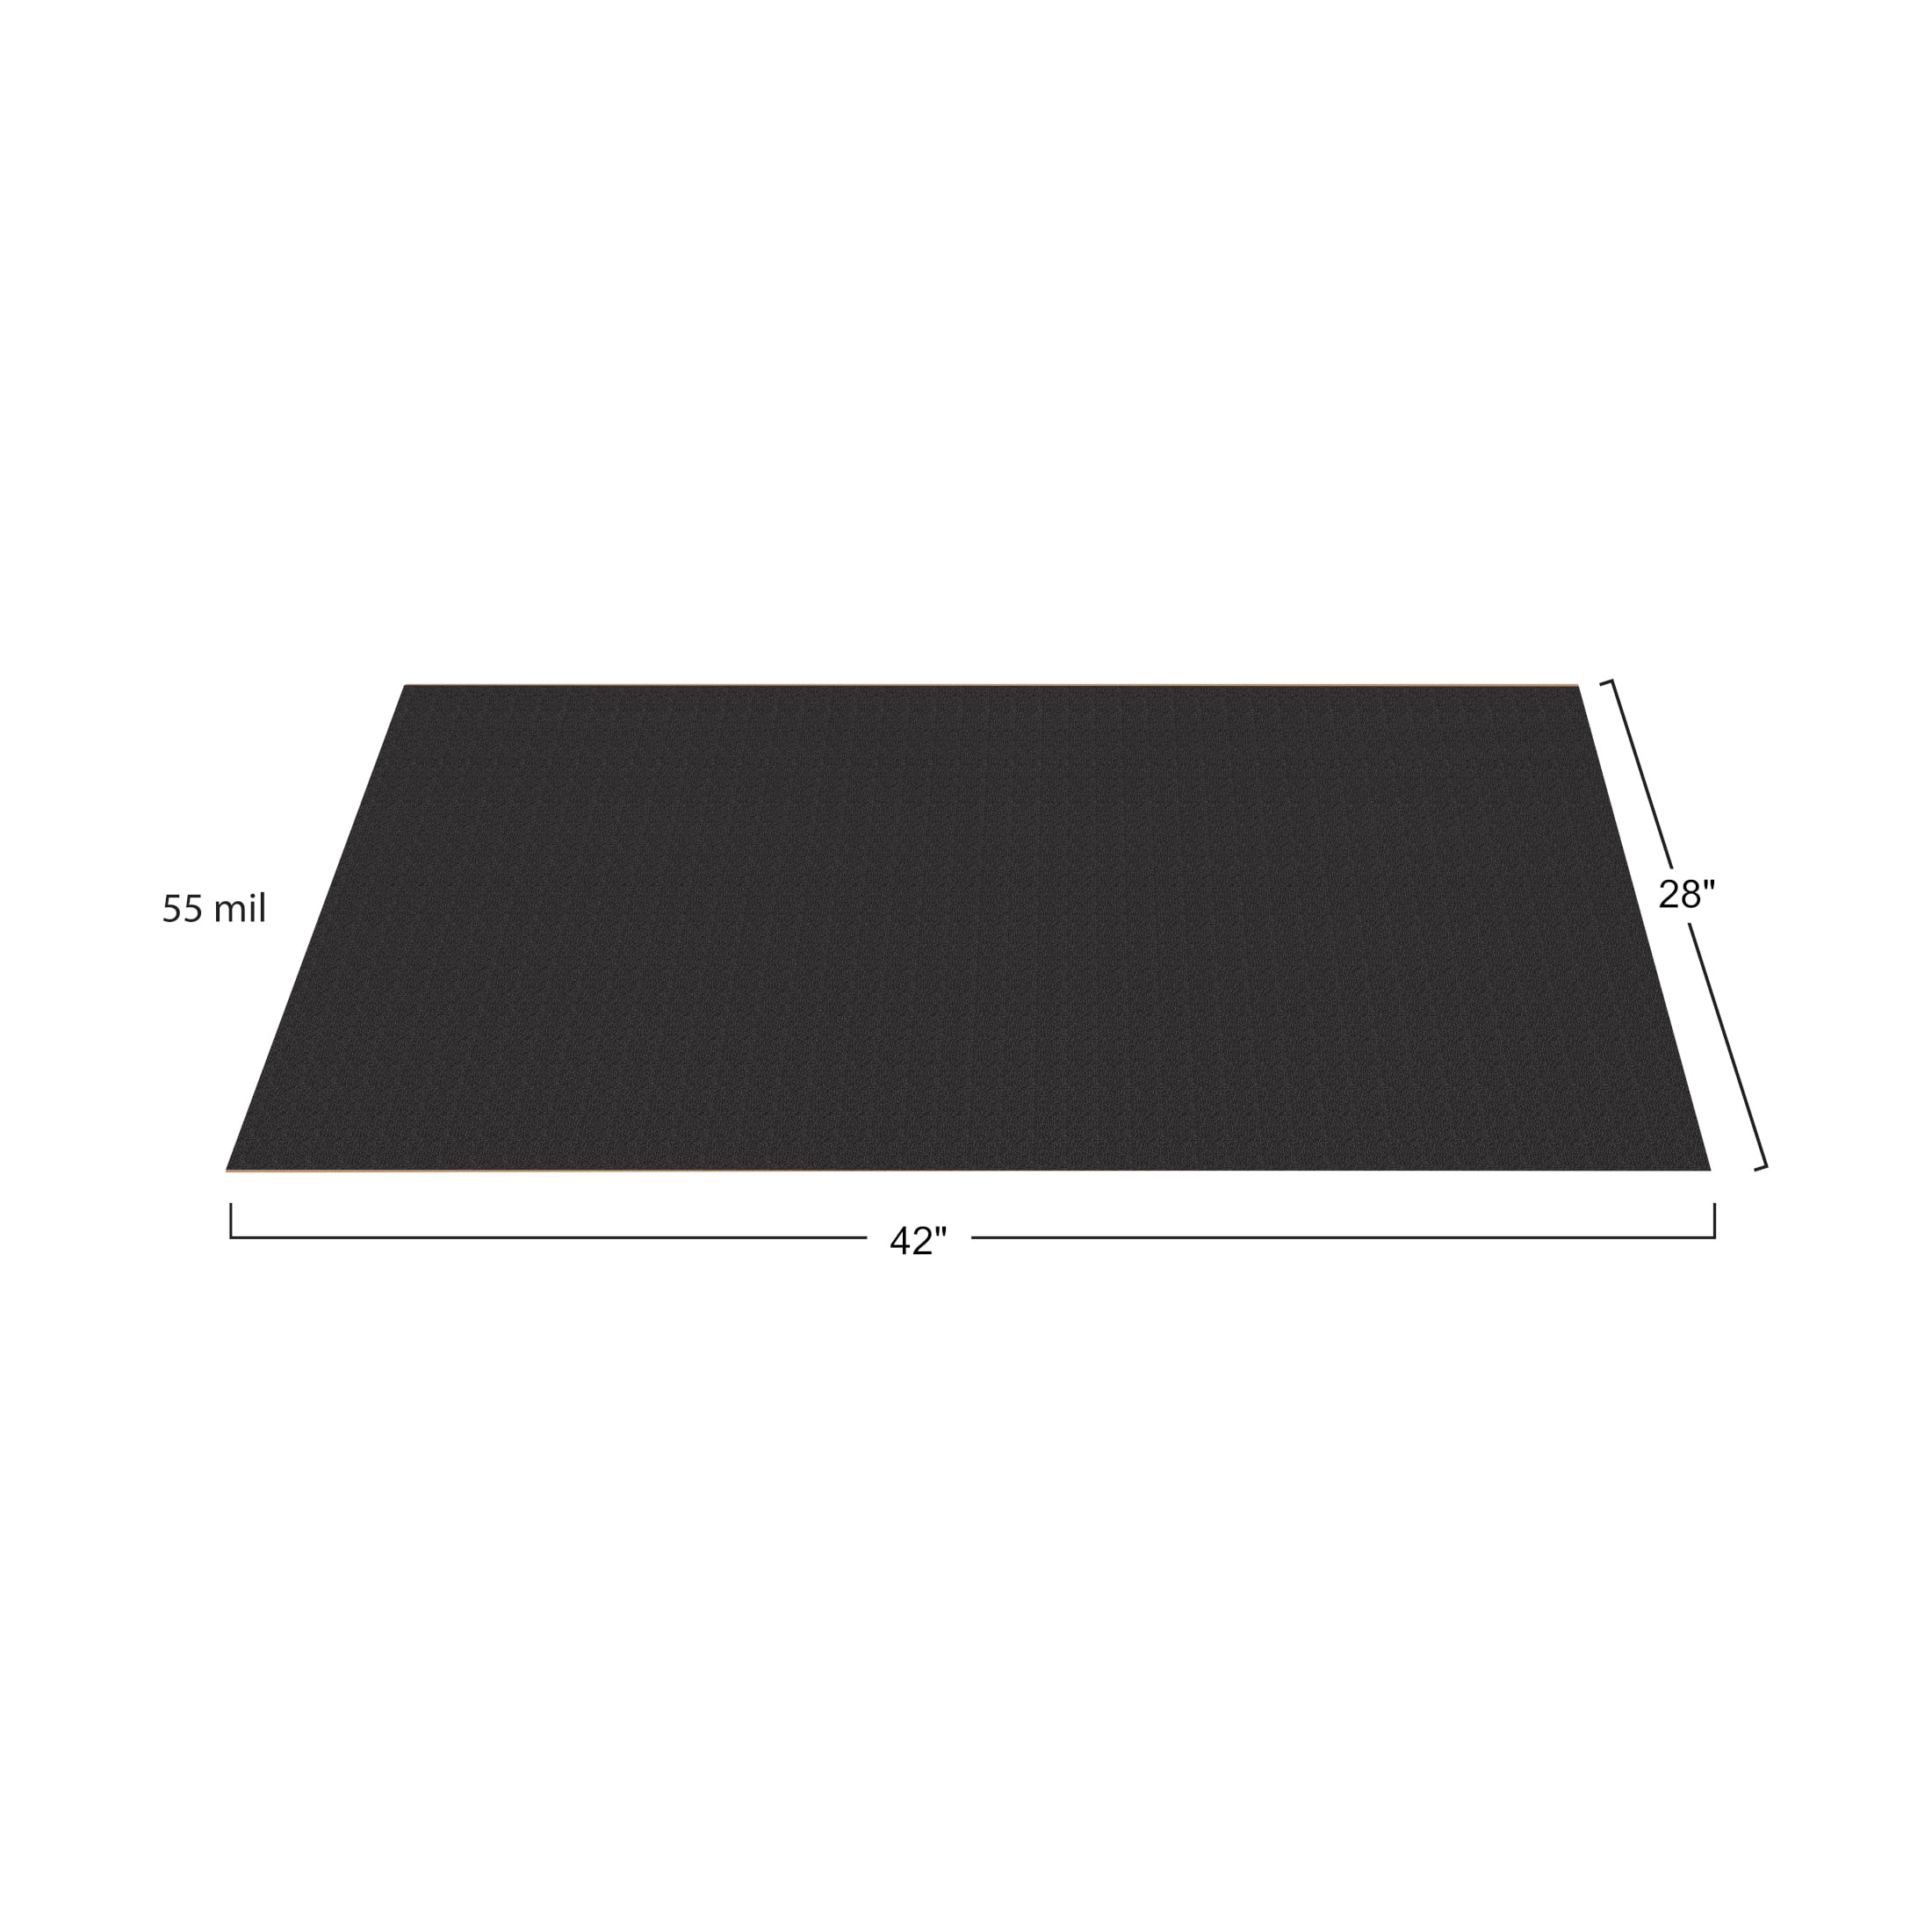 Hard Floor Pet Cage Mat: Clear | Resilia Brands 48X48In